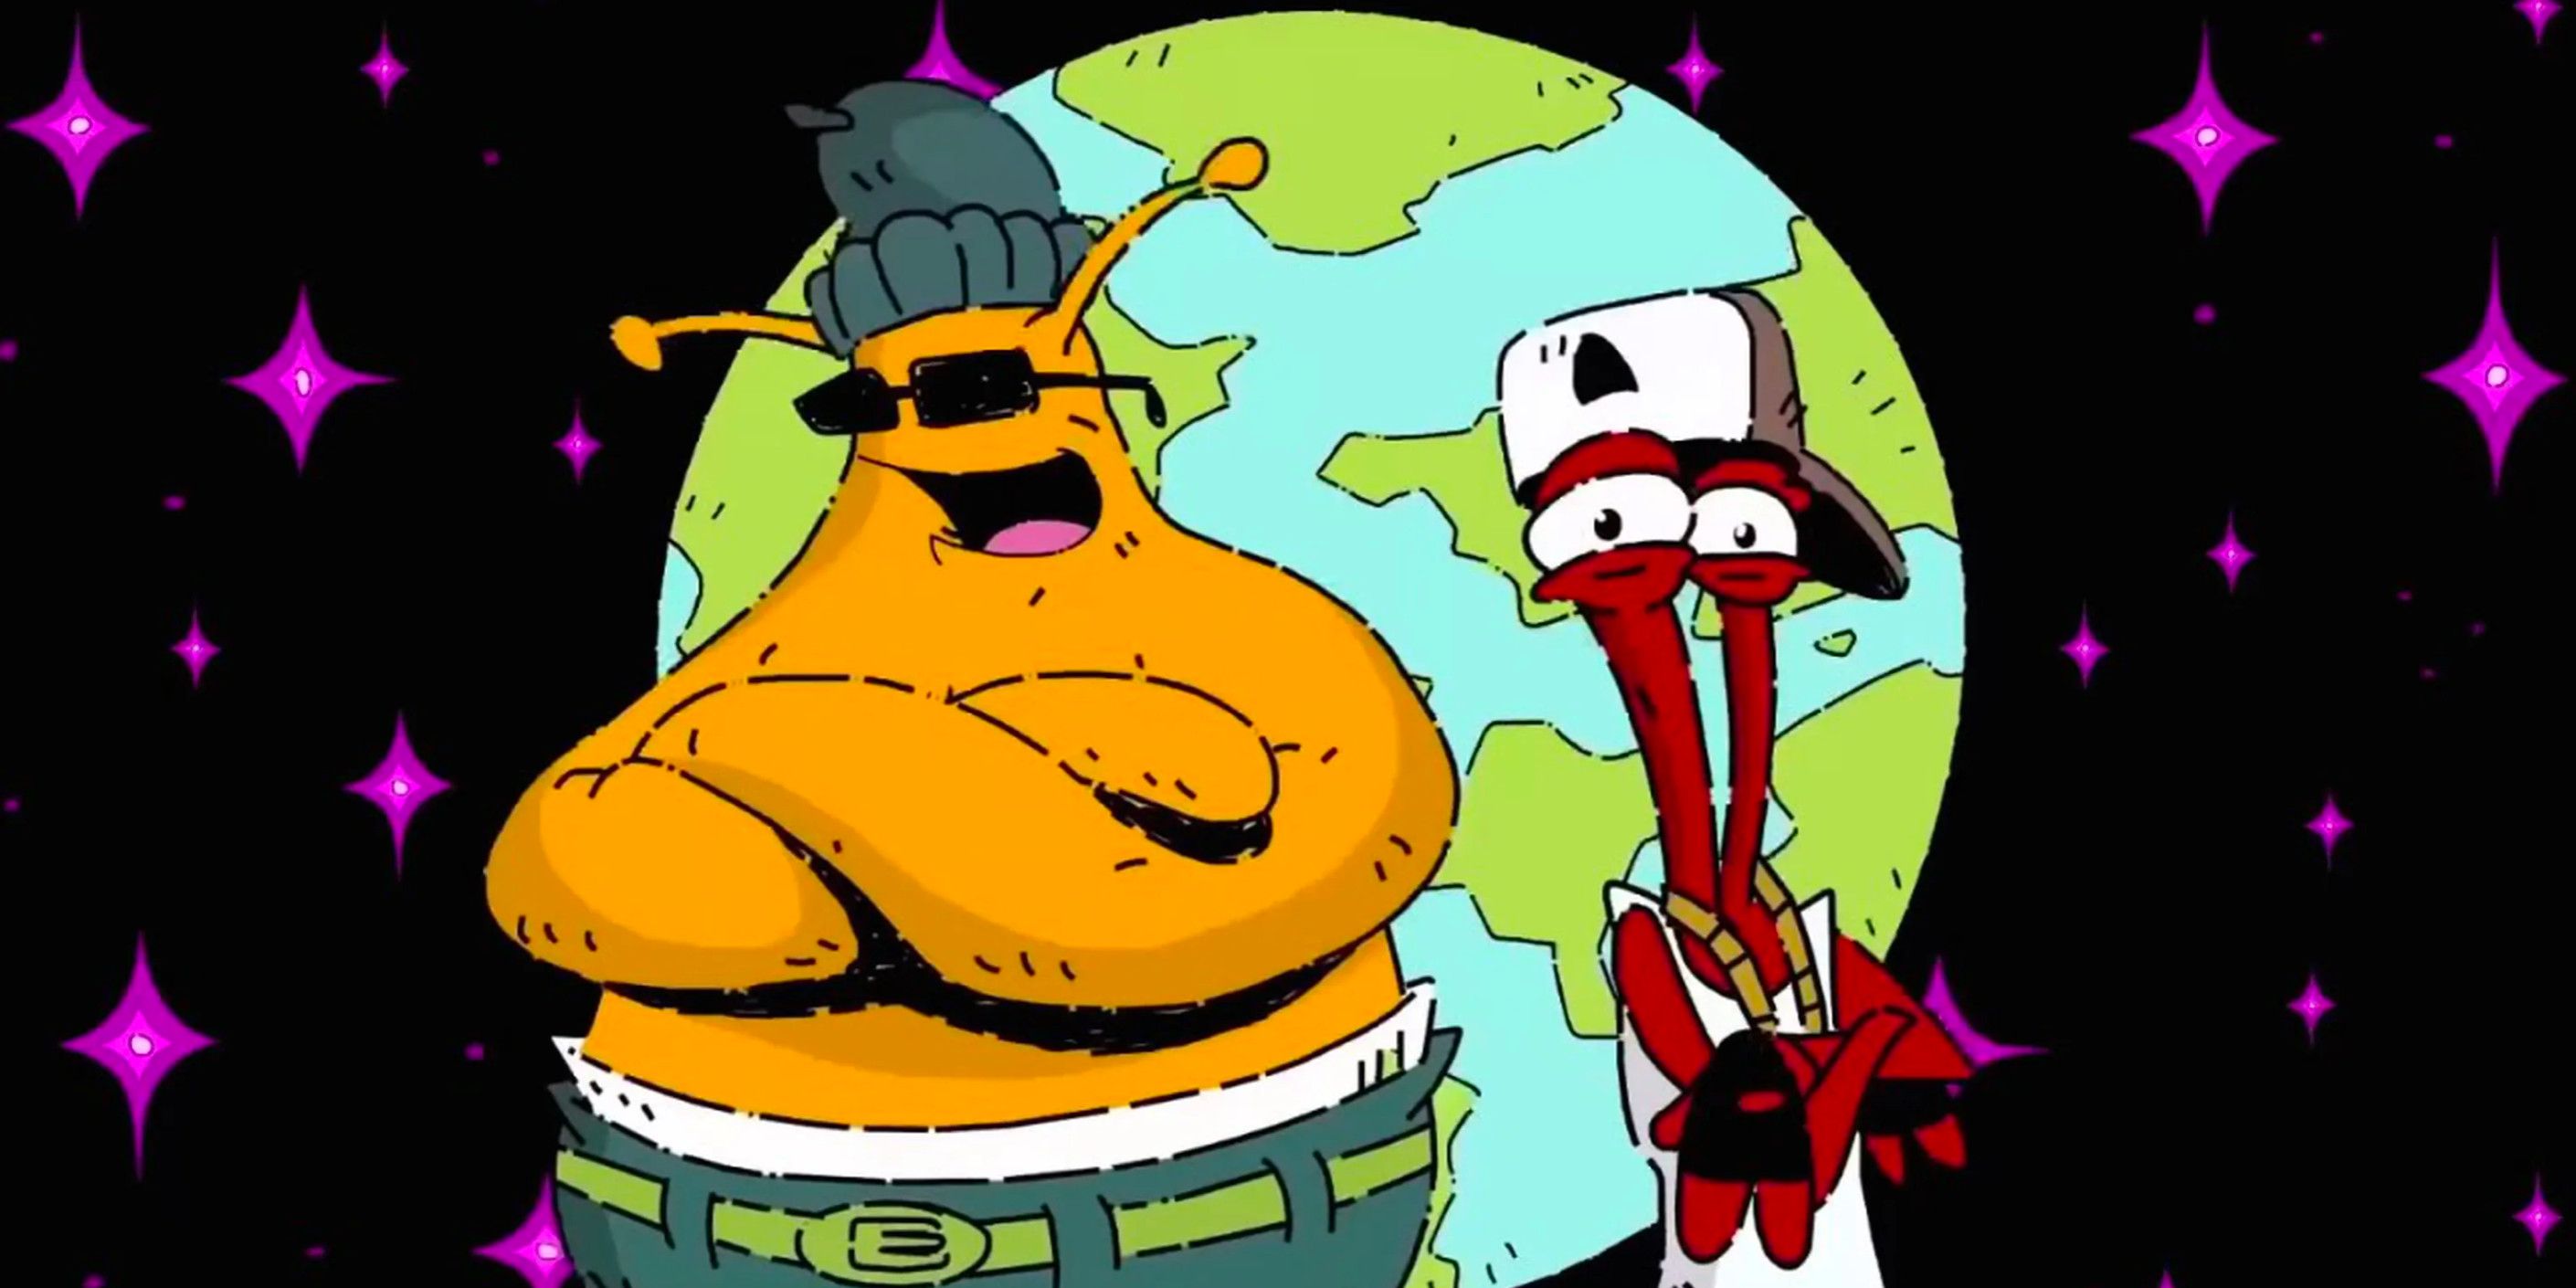 Promotional art for Toejam and Earl: Back in the Groove by Human Nature Studios.